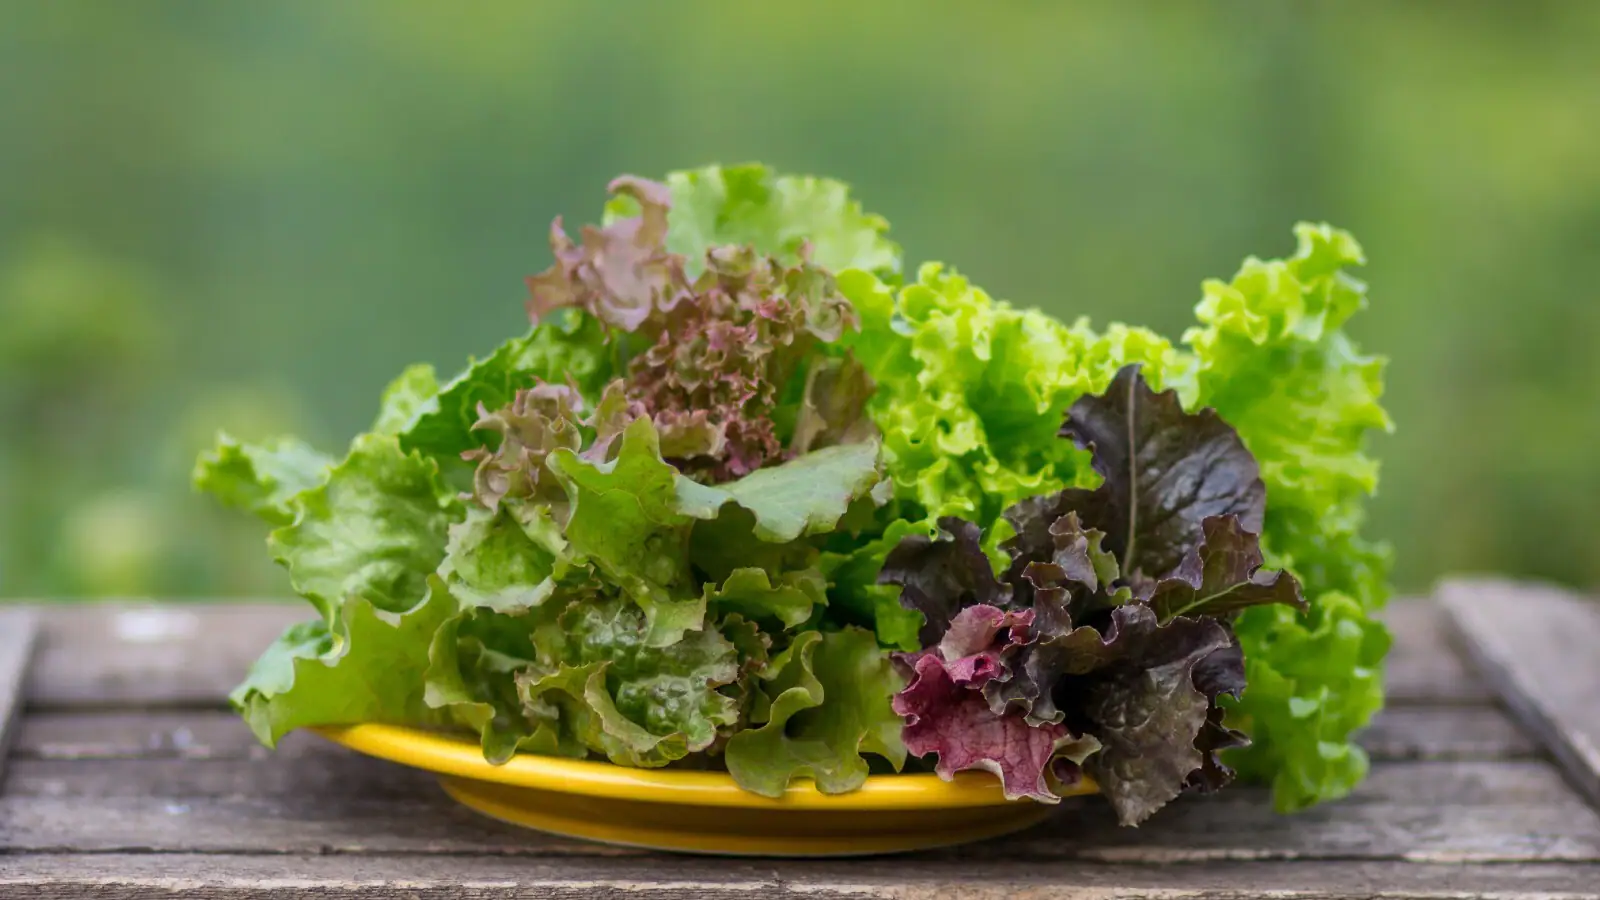 What Is Green Leaf Lettuce?